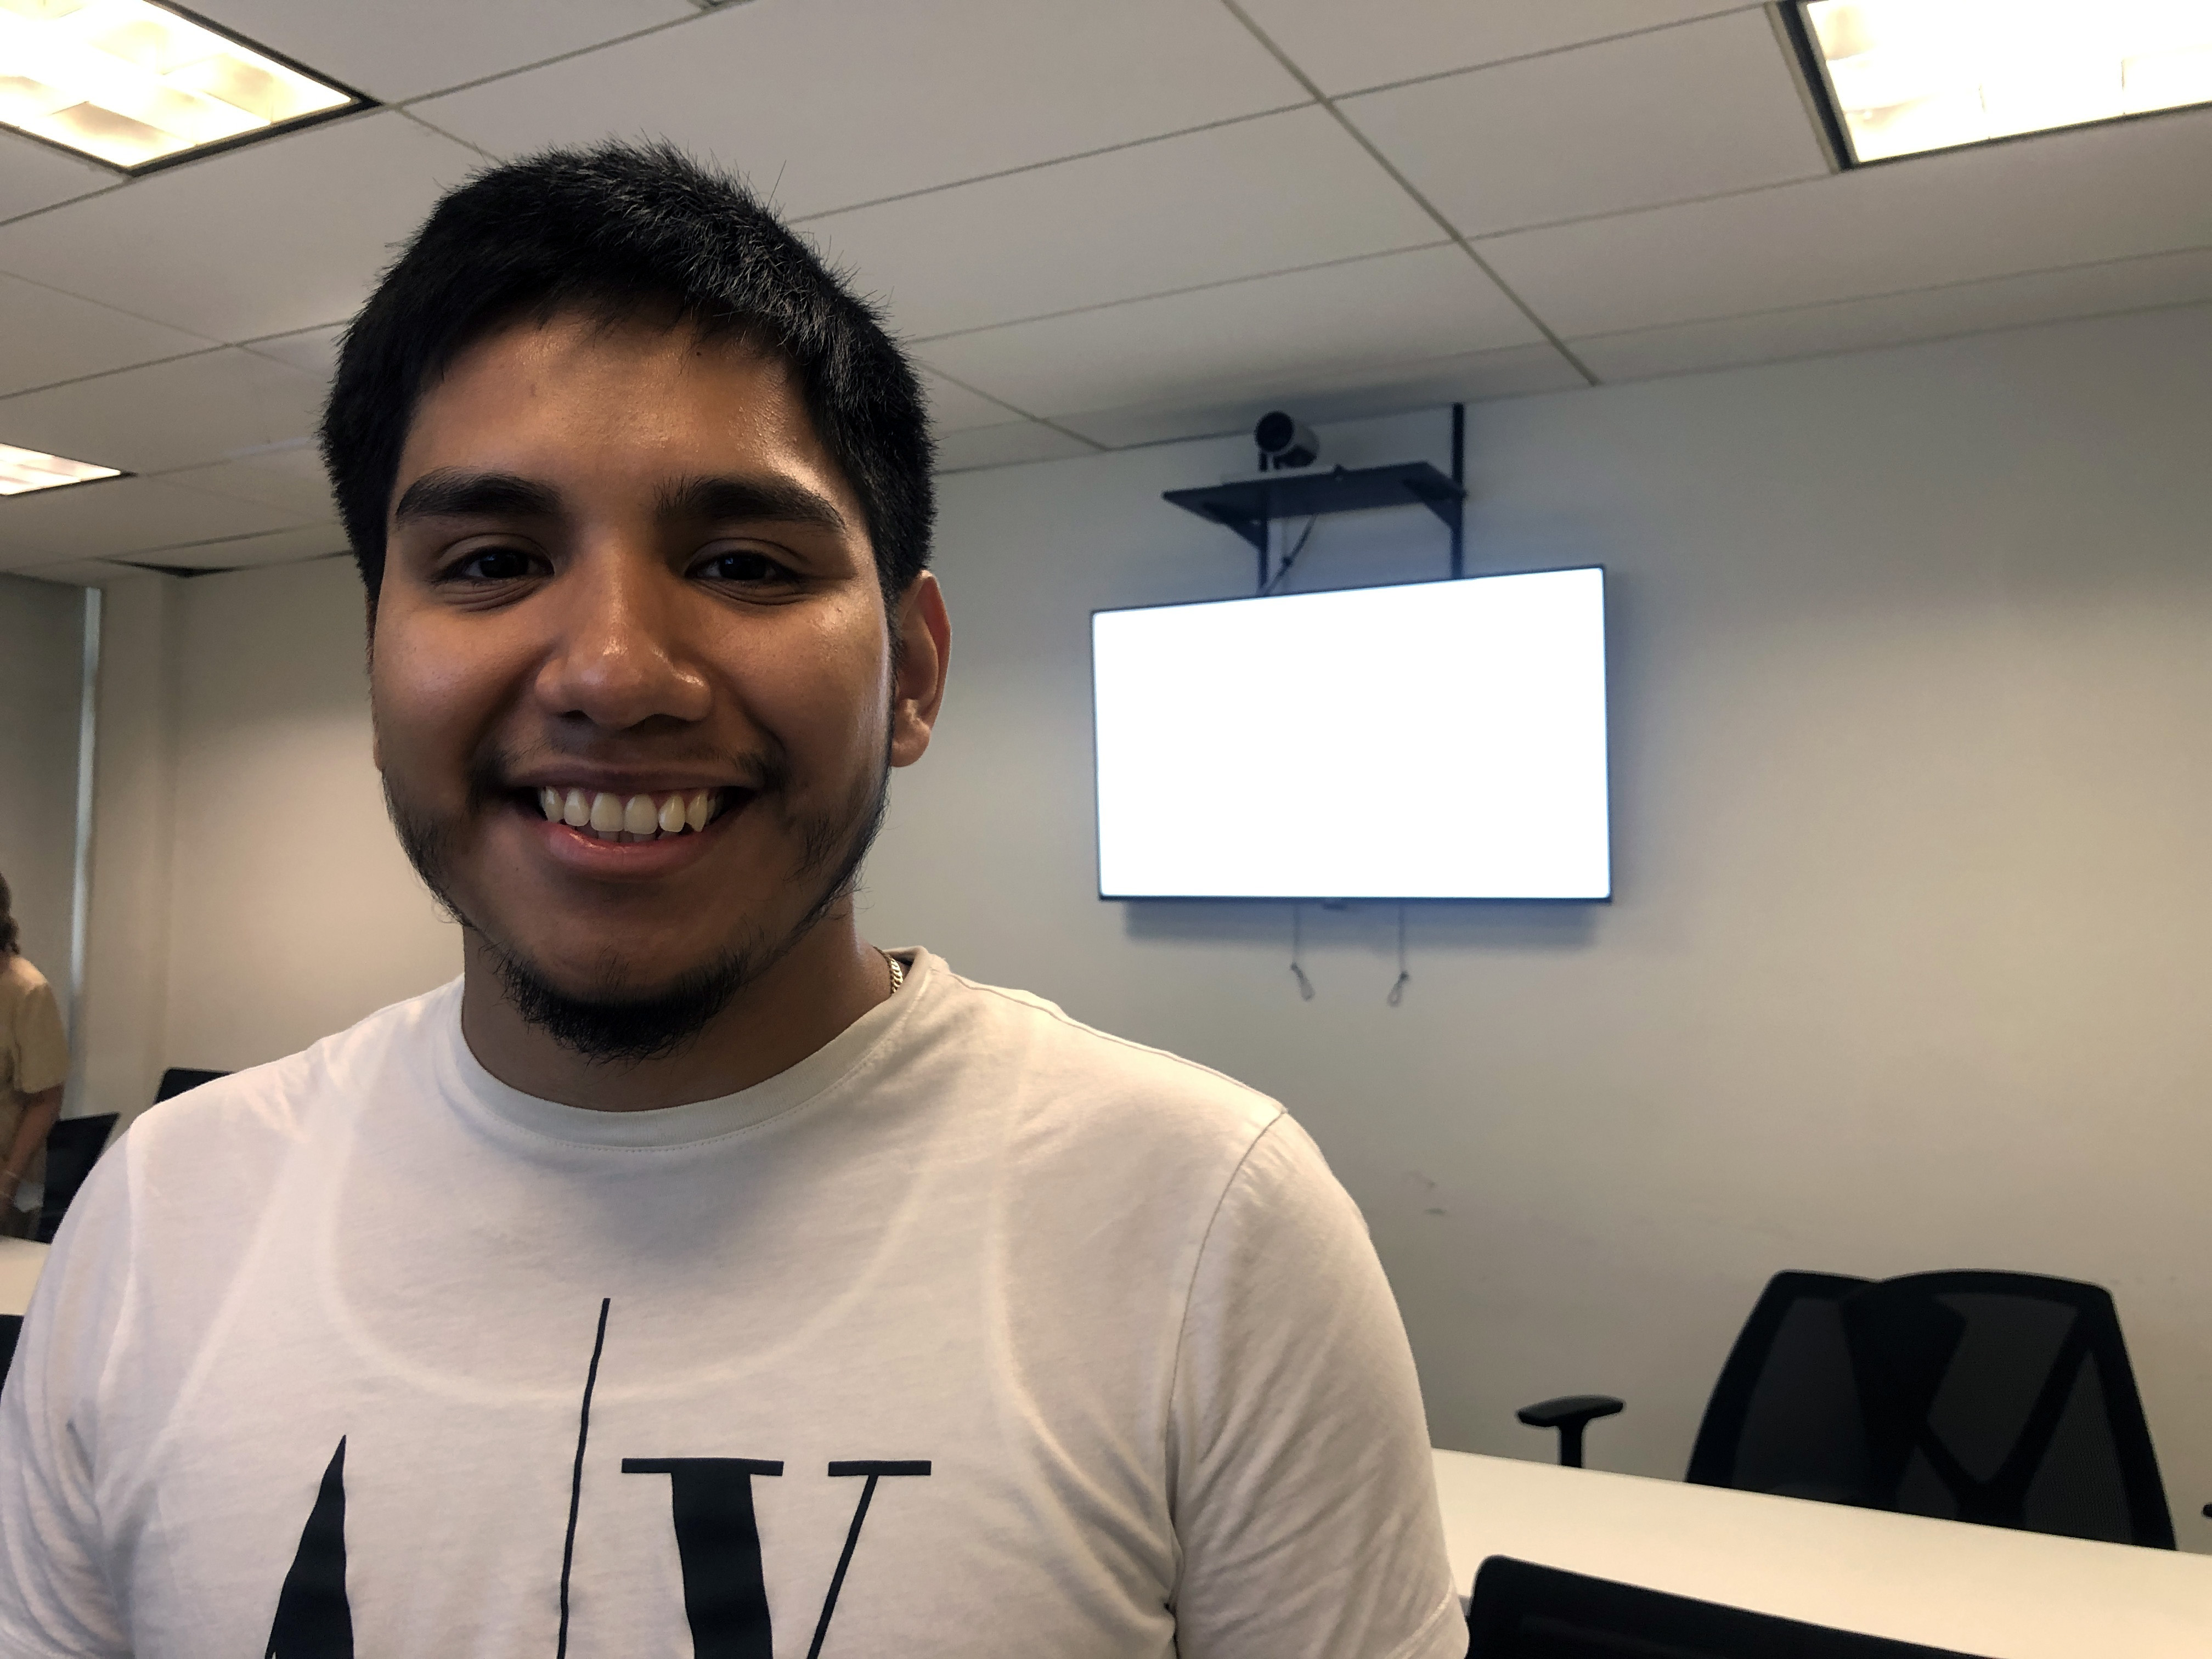 A young man smiling standing in a tech classroom